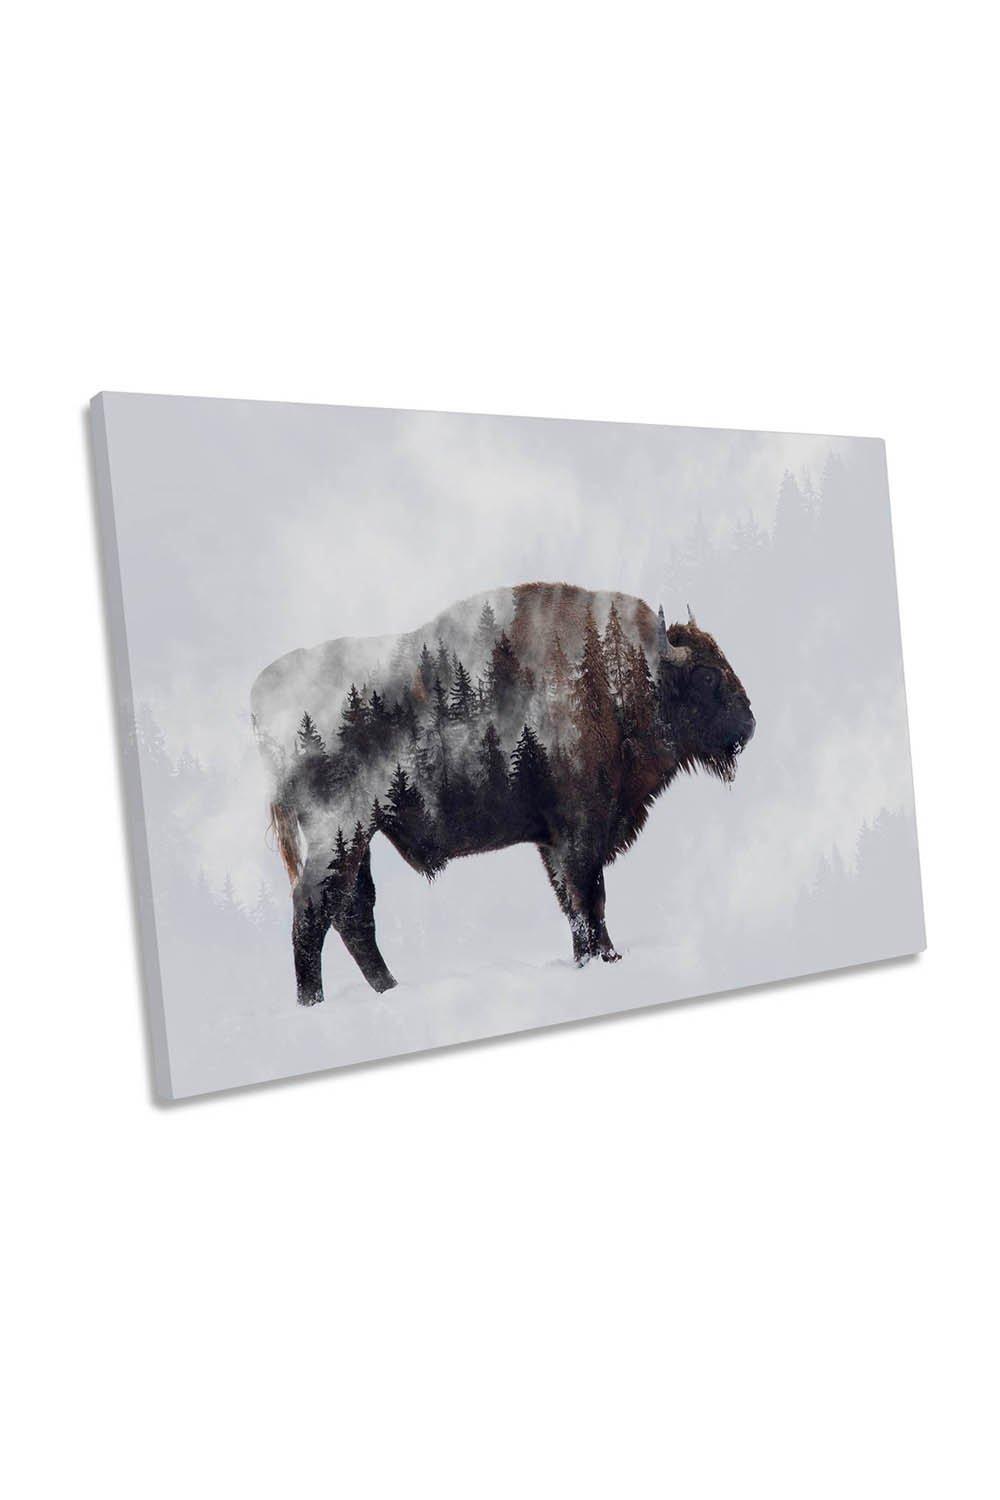 Bison Double Exposure Modern Canvas Wall Art Picture Print